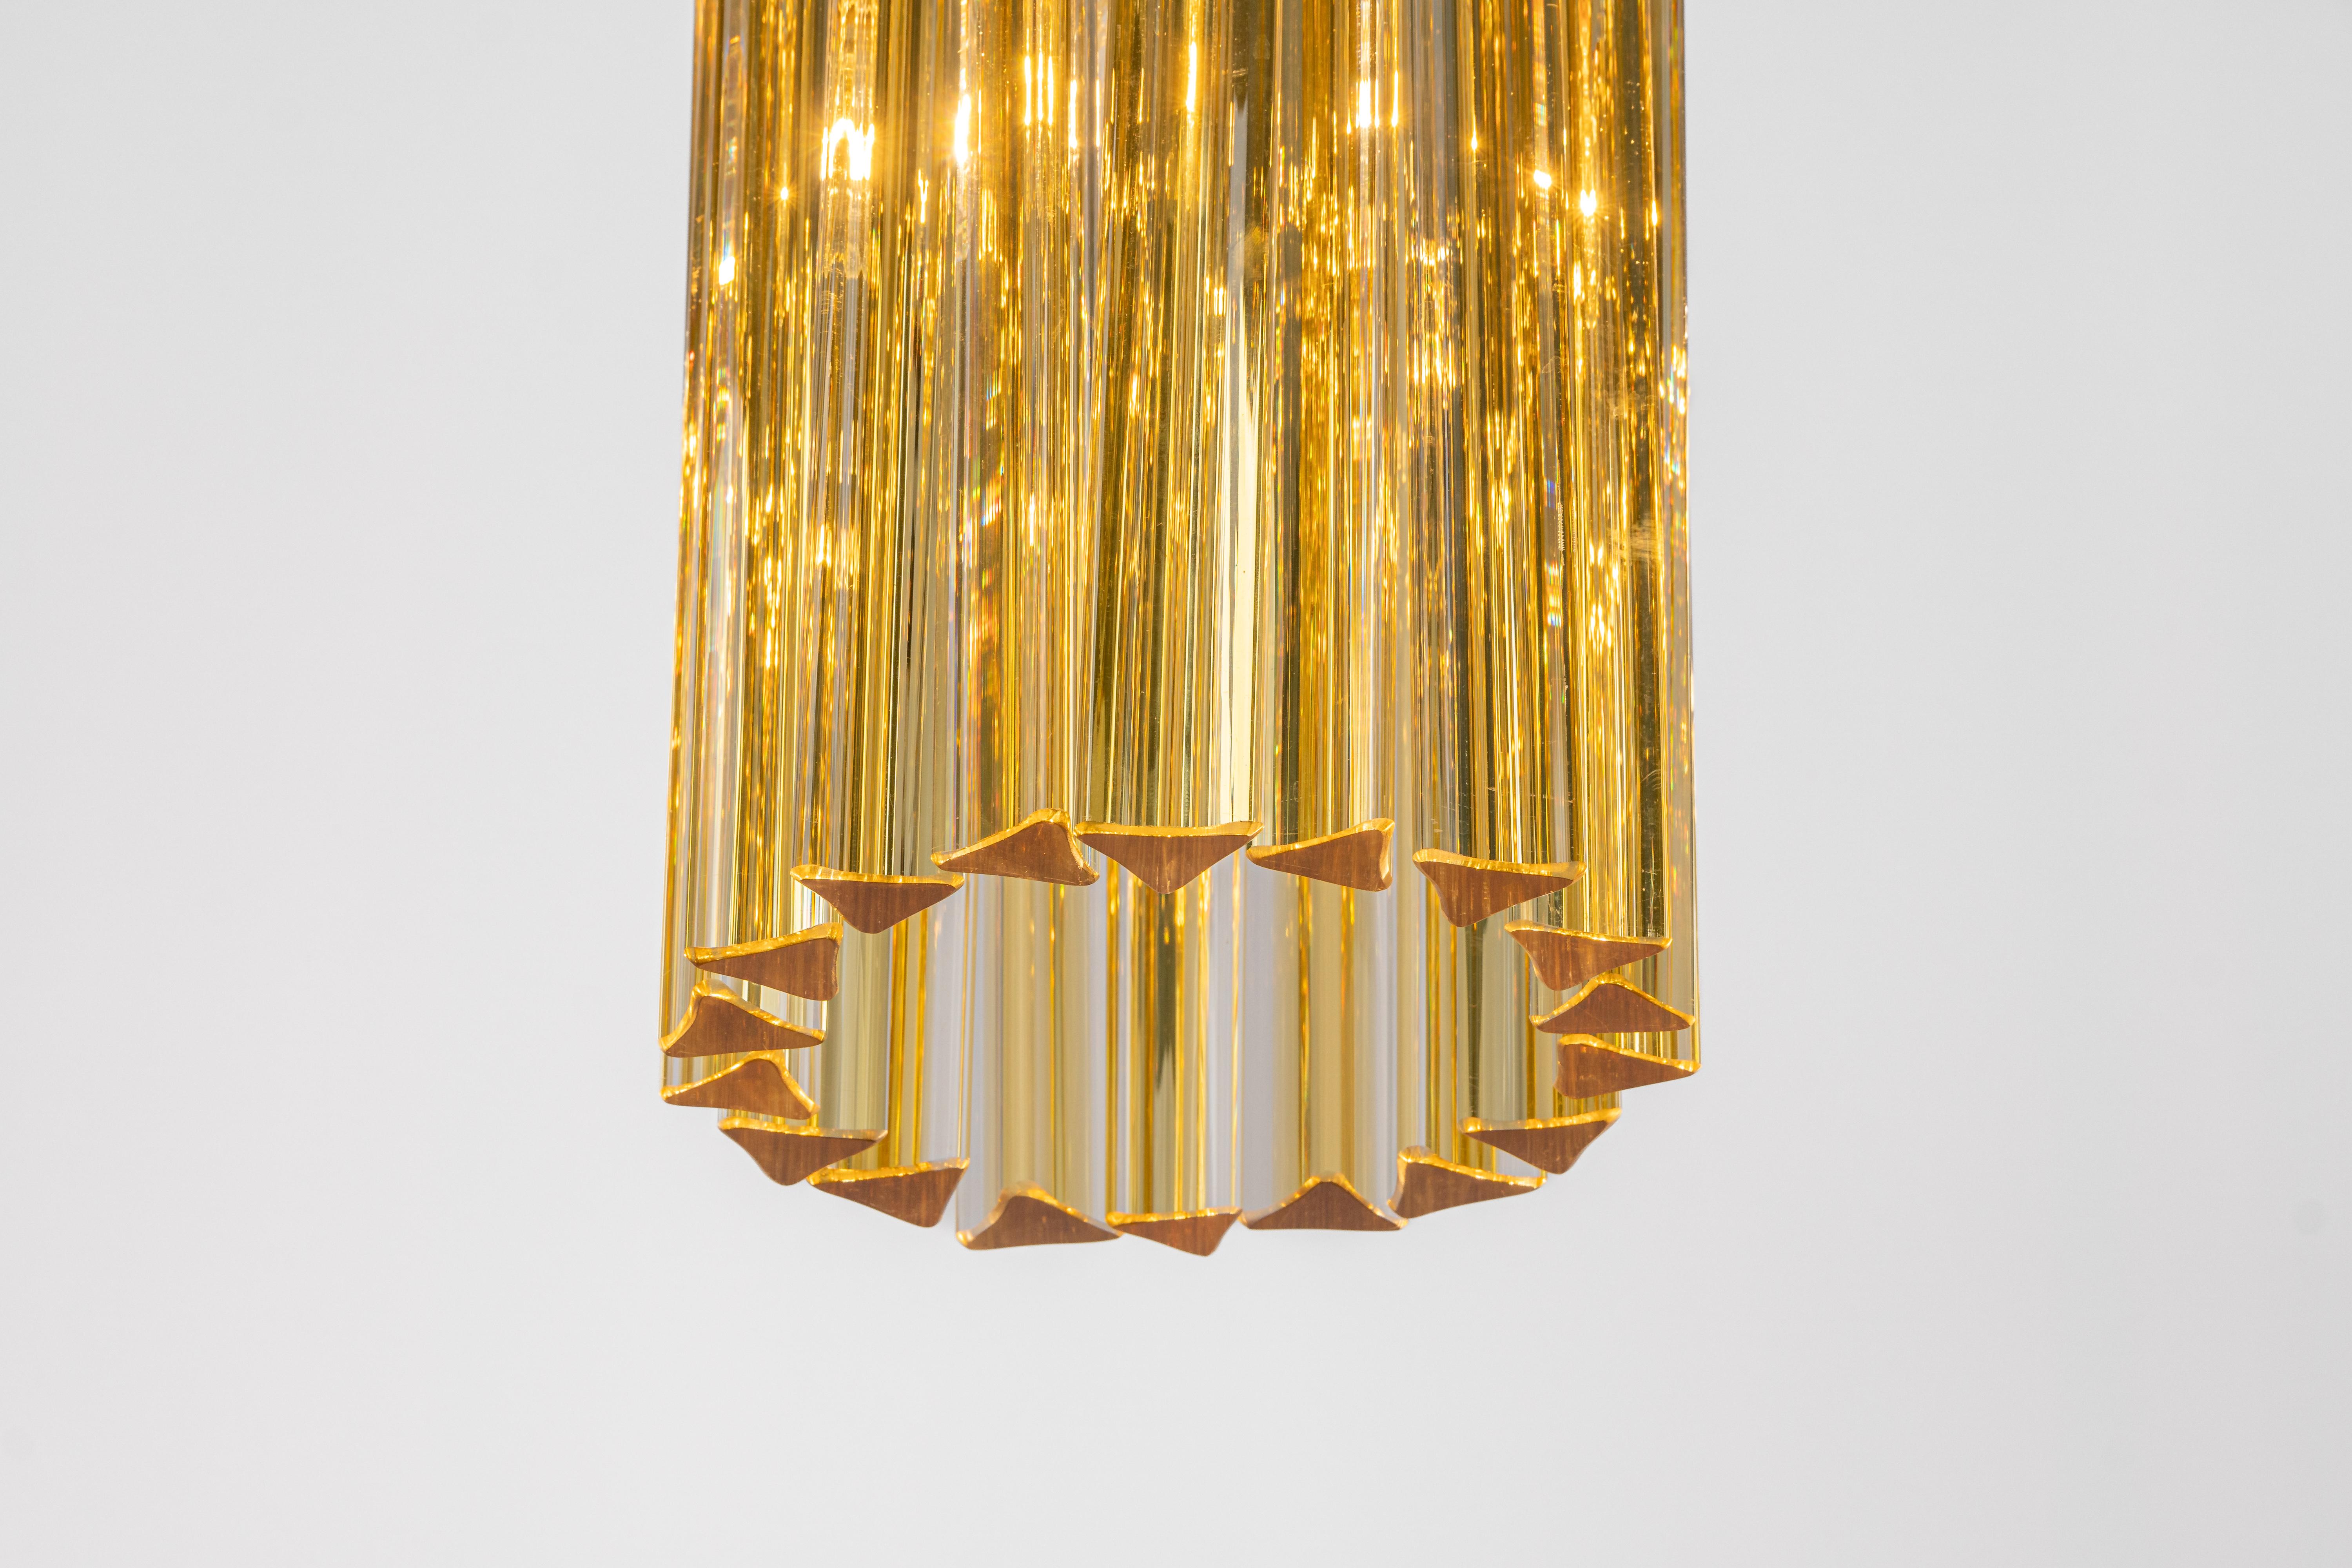 Stunning Murano glass Flush mount light designed by Venini for Kalmar, 1960s
Brass plate gathers 18 structured glasses, beautifully refracting the light very heavy quality.

High quality and in very good condition. Cleaned, well-wired, and ready